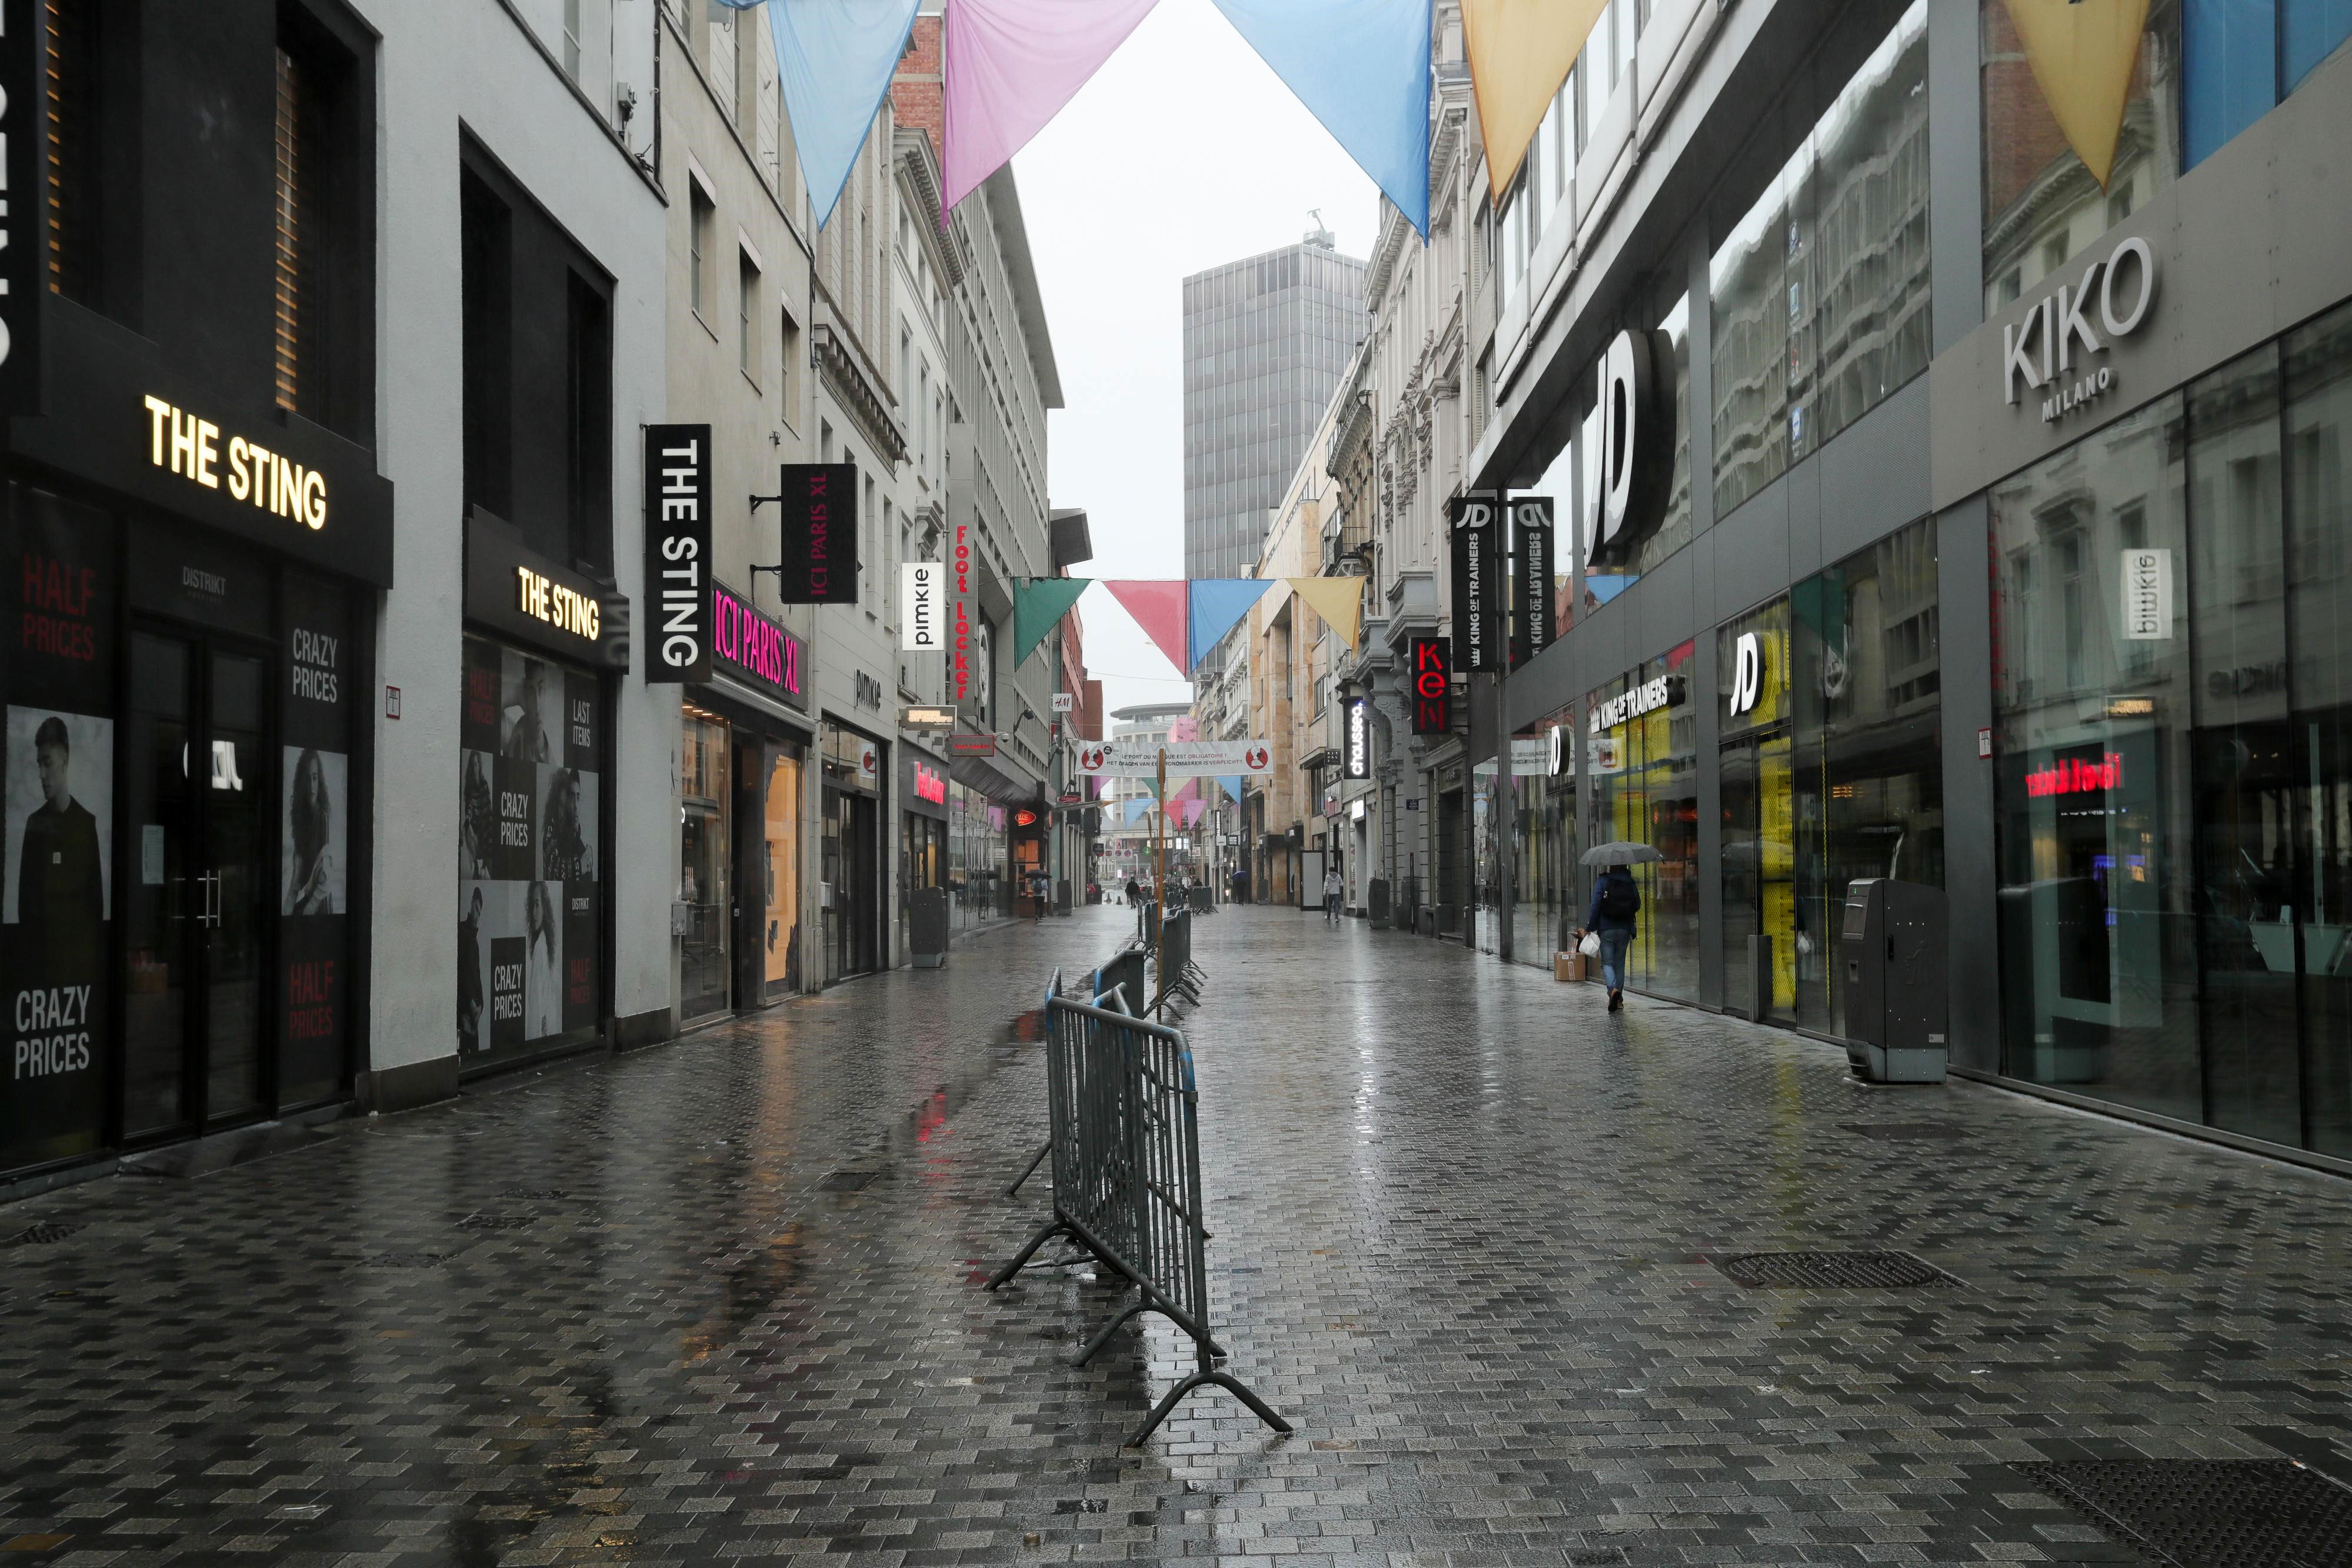 Shops are closed in Brussels, Belgium, on November 2.